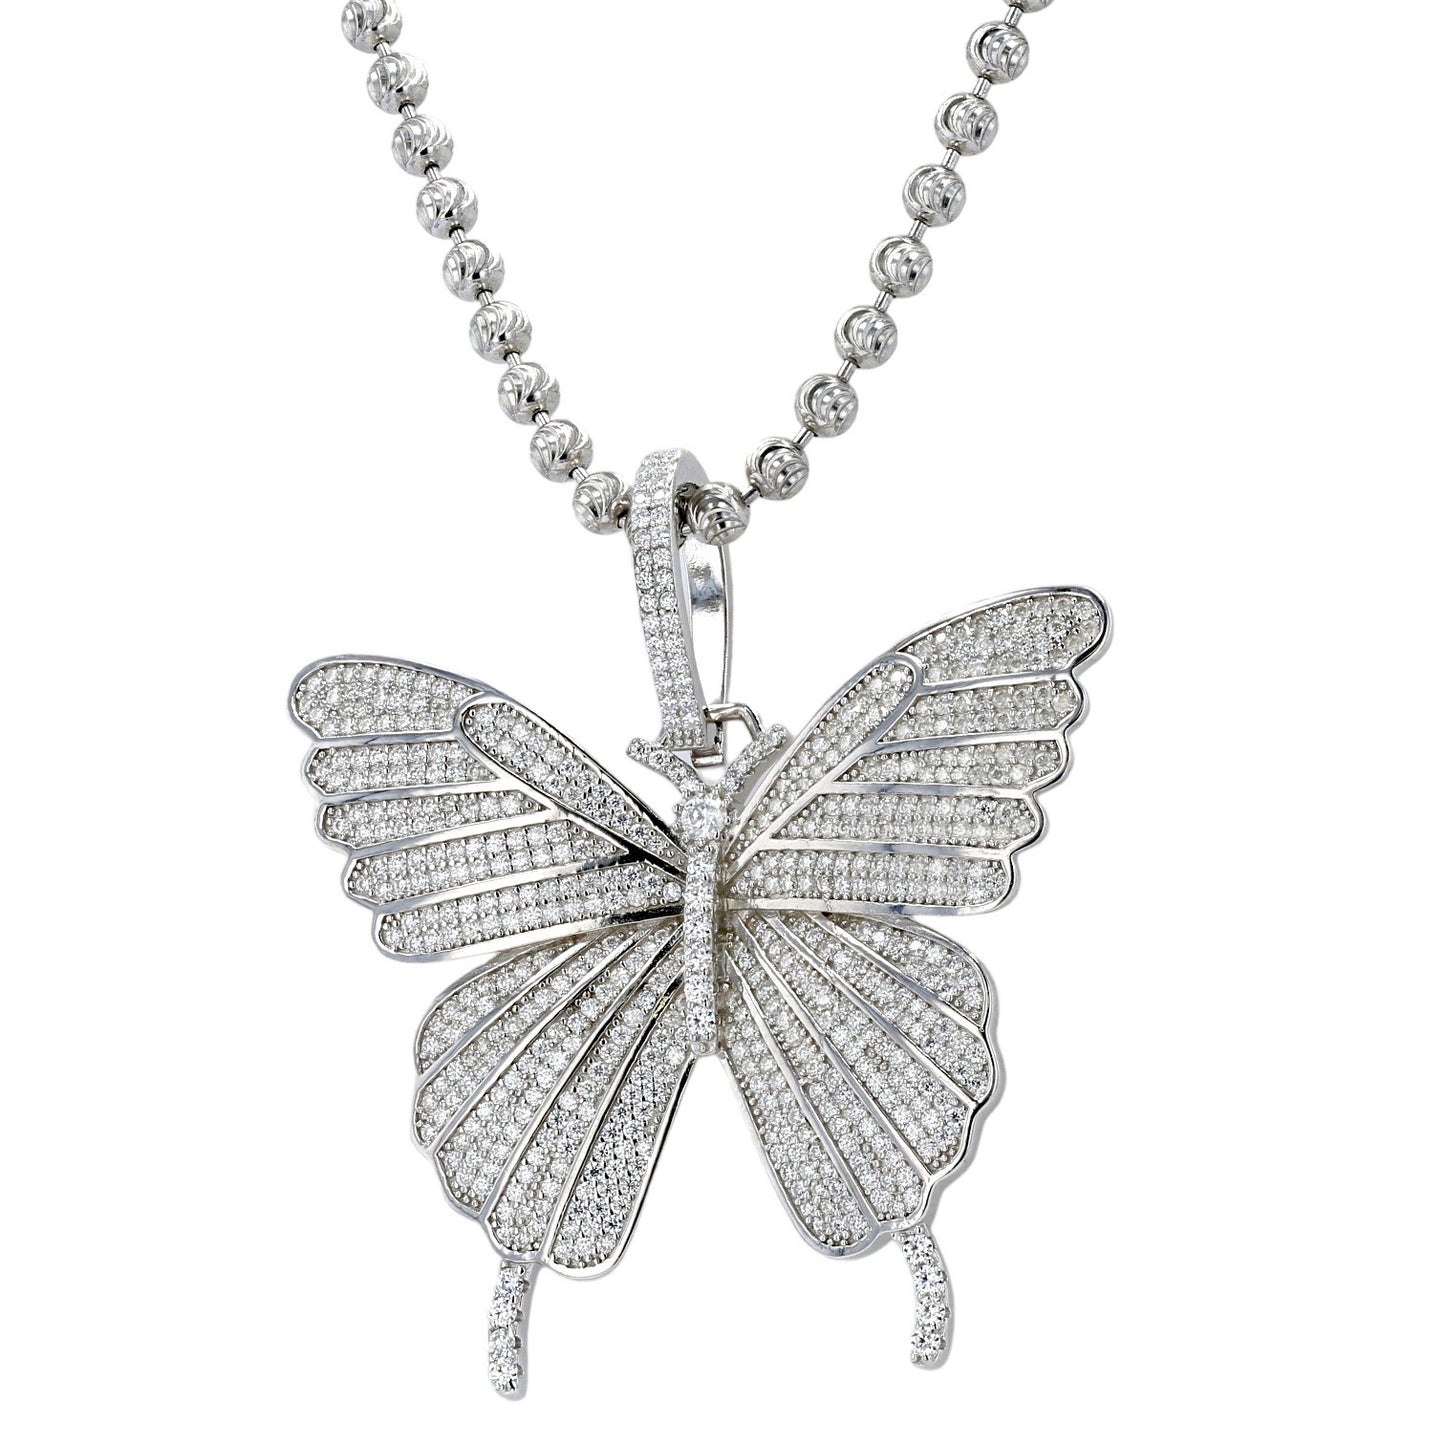 White silver 925 necklace butterfly pendant